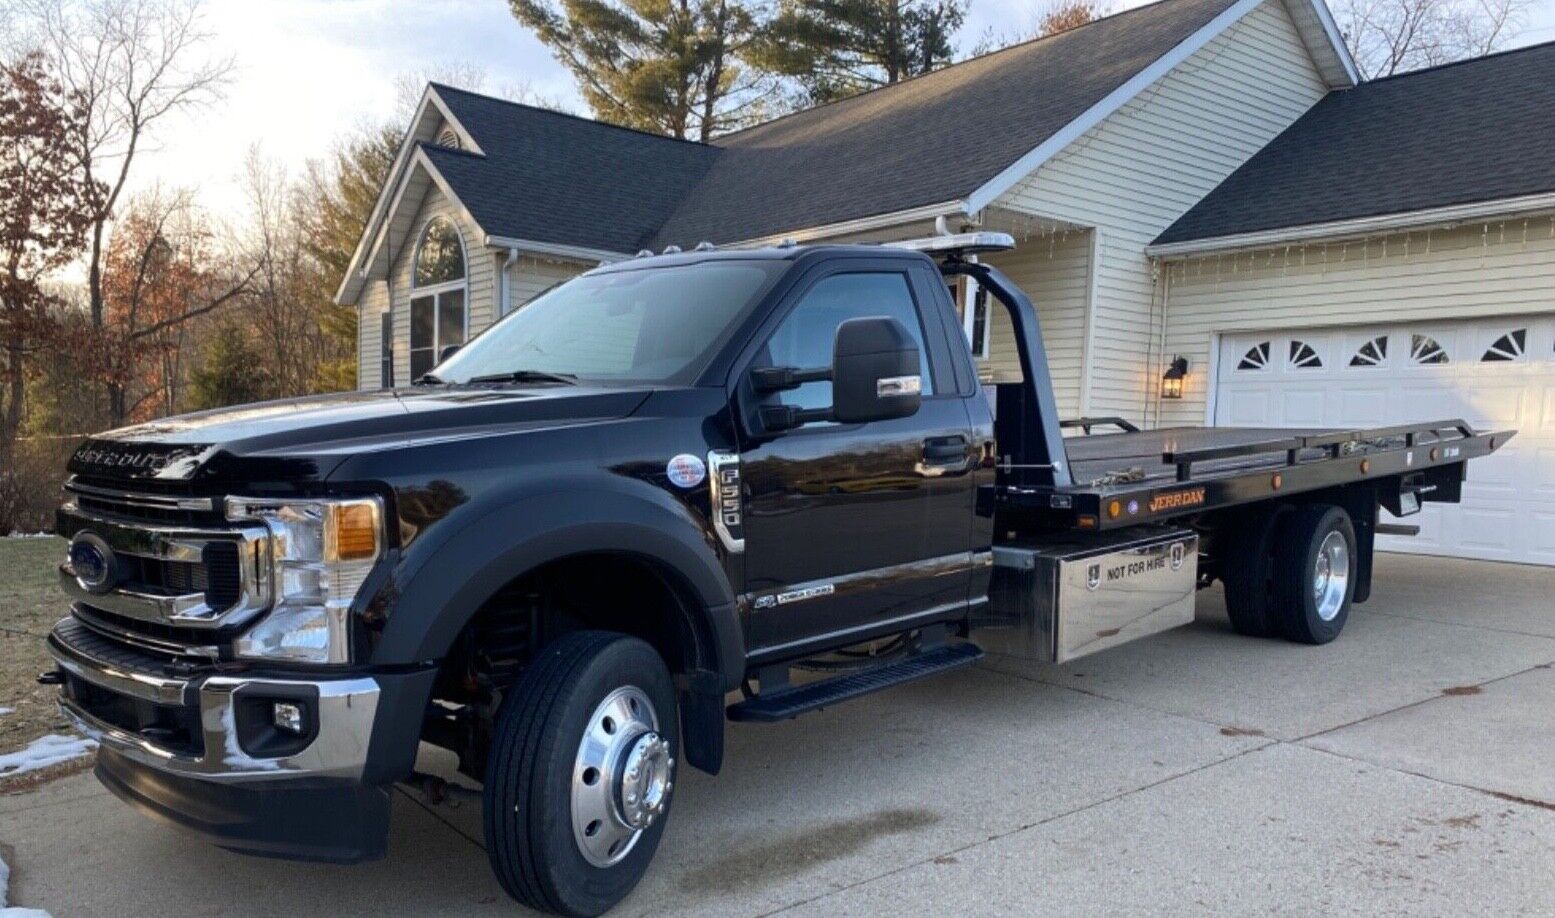 2022 Ford F-550 Superduty Flatbed Tow Truck Rollback 1500 Miles